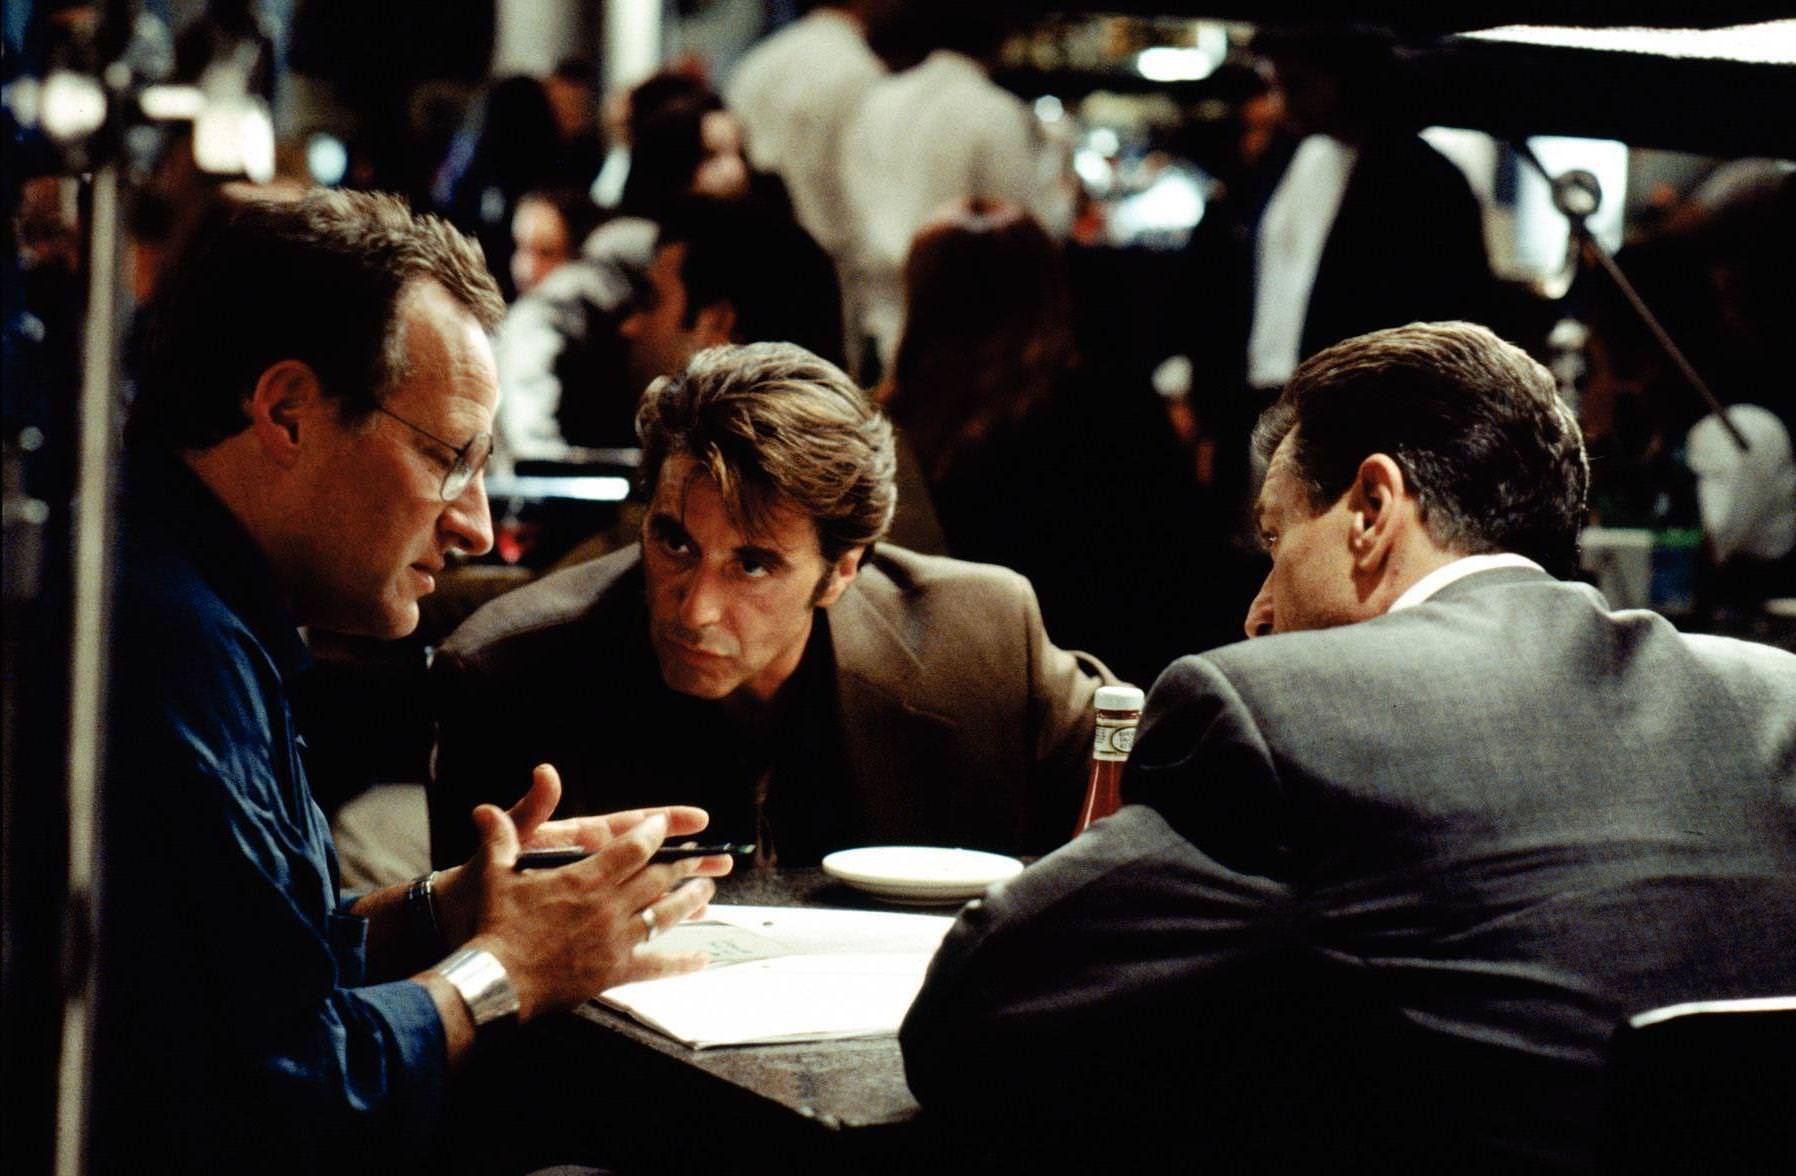 Heat directed by Michael Mann